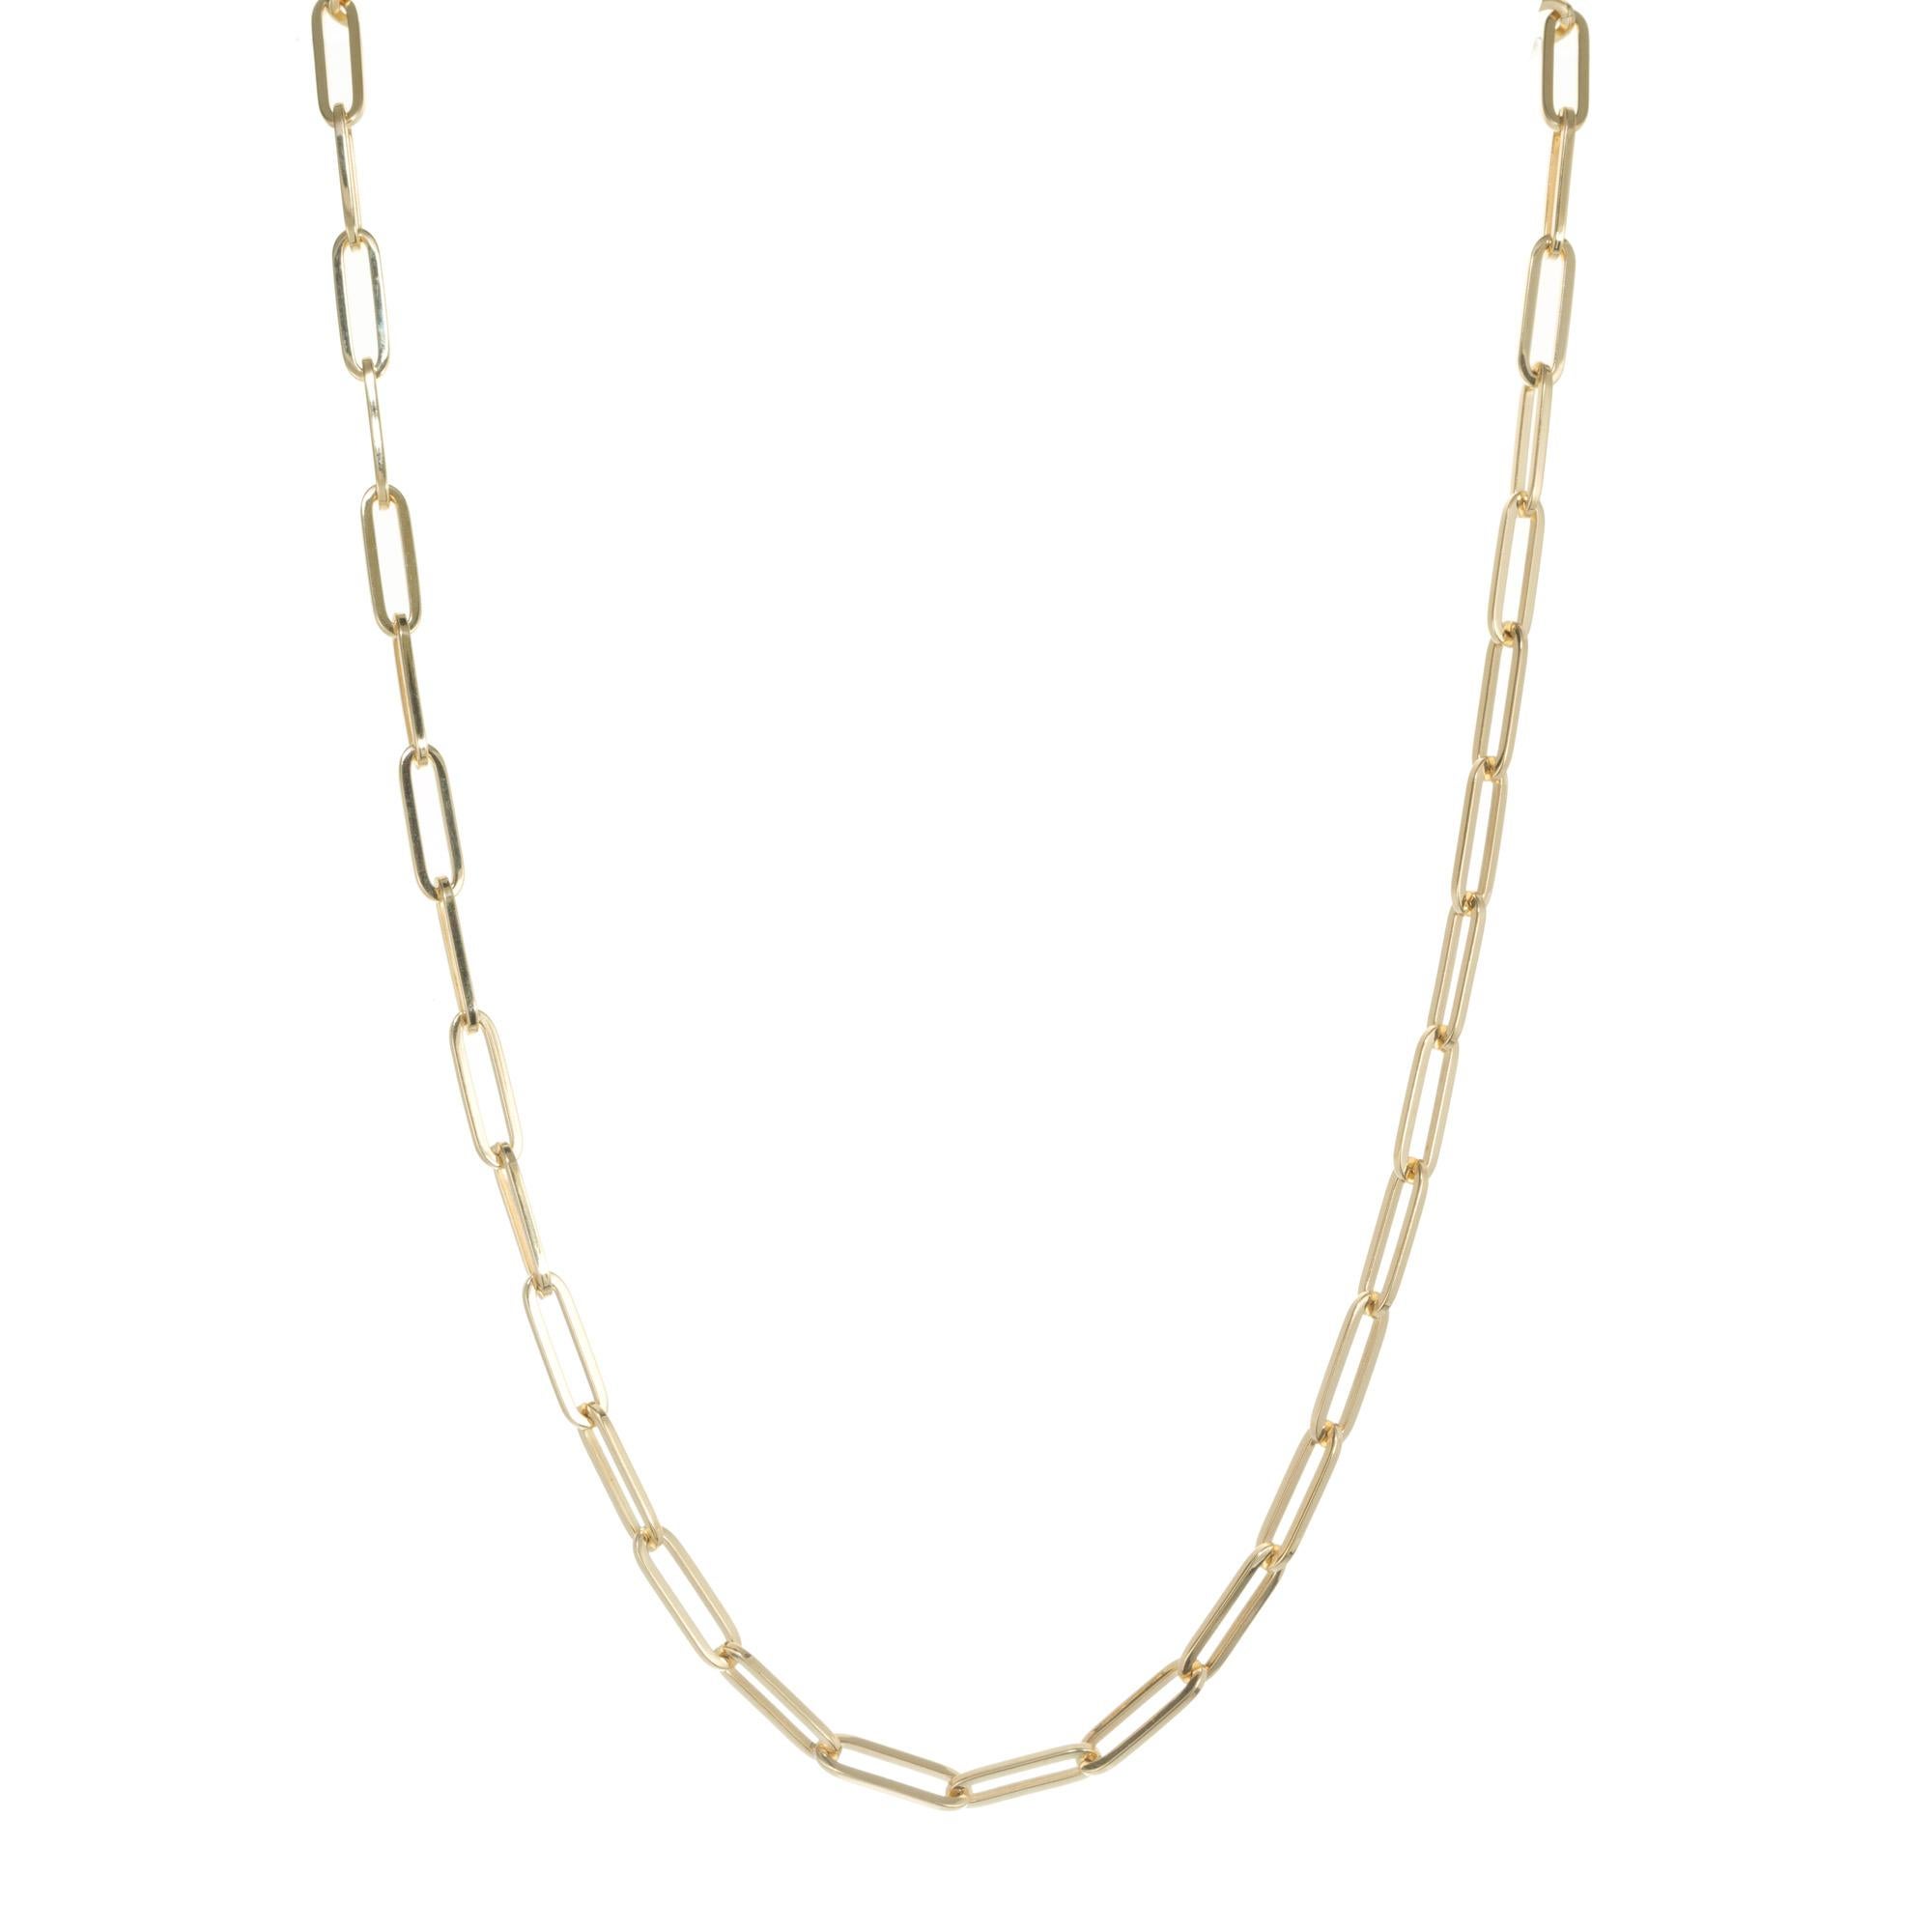 14k yellow gold paper clip necklace, 20 inches long. 

14k yellow gold
20 inches 
Weight: 22.6 grams